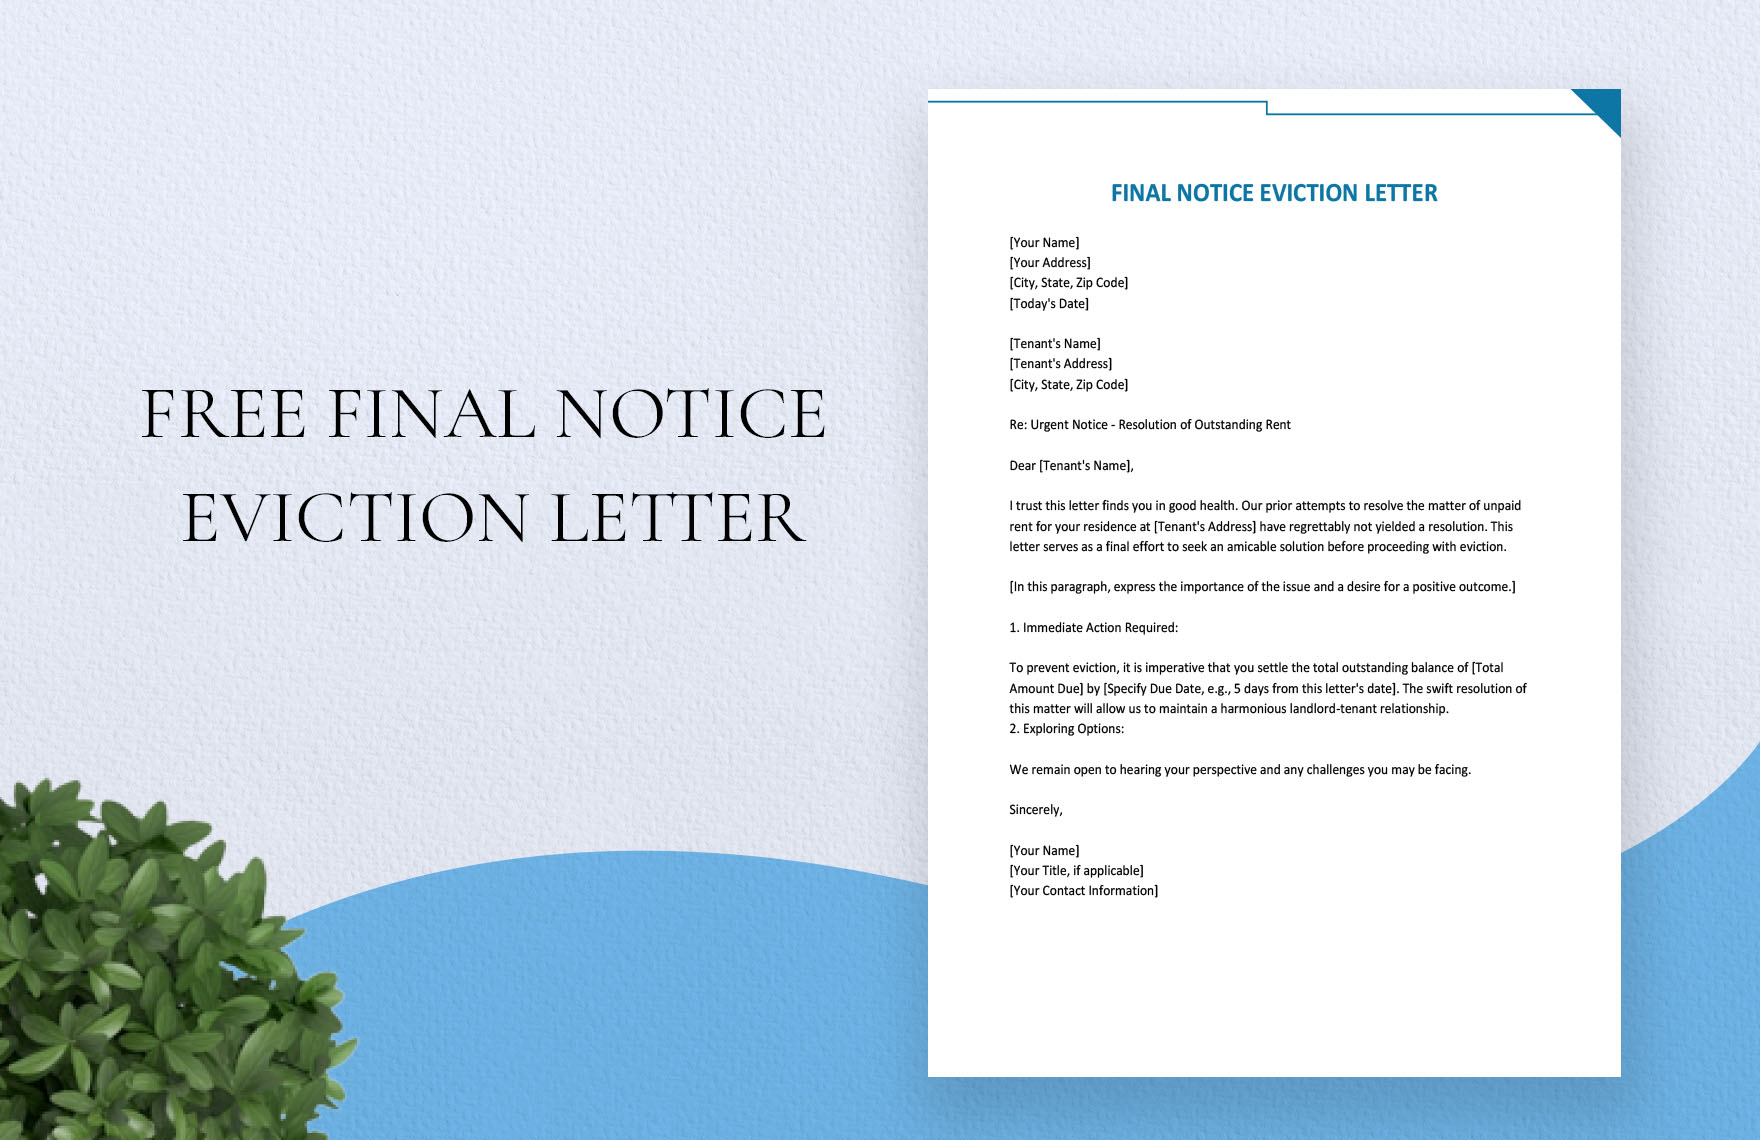 Final Notice Eviction Letter